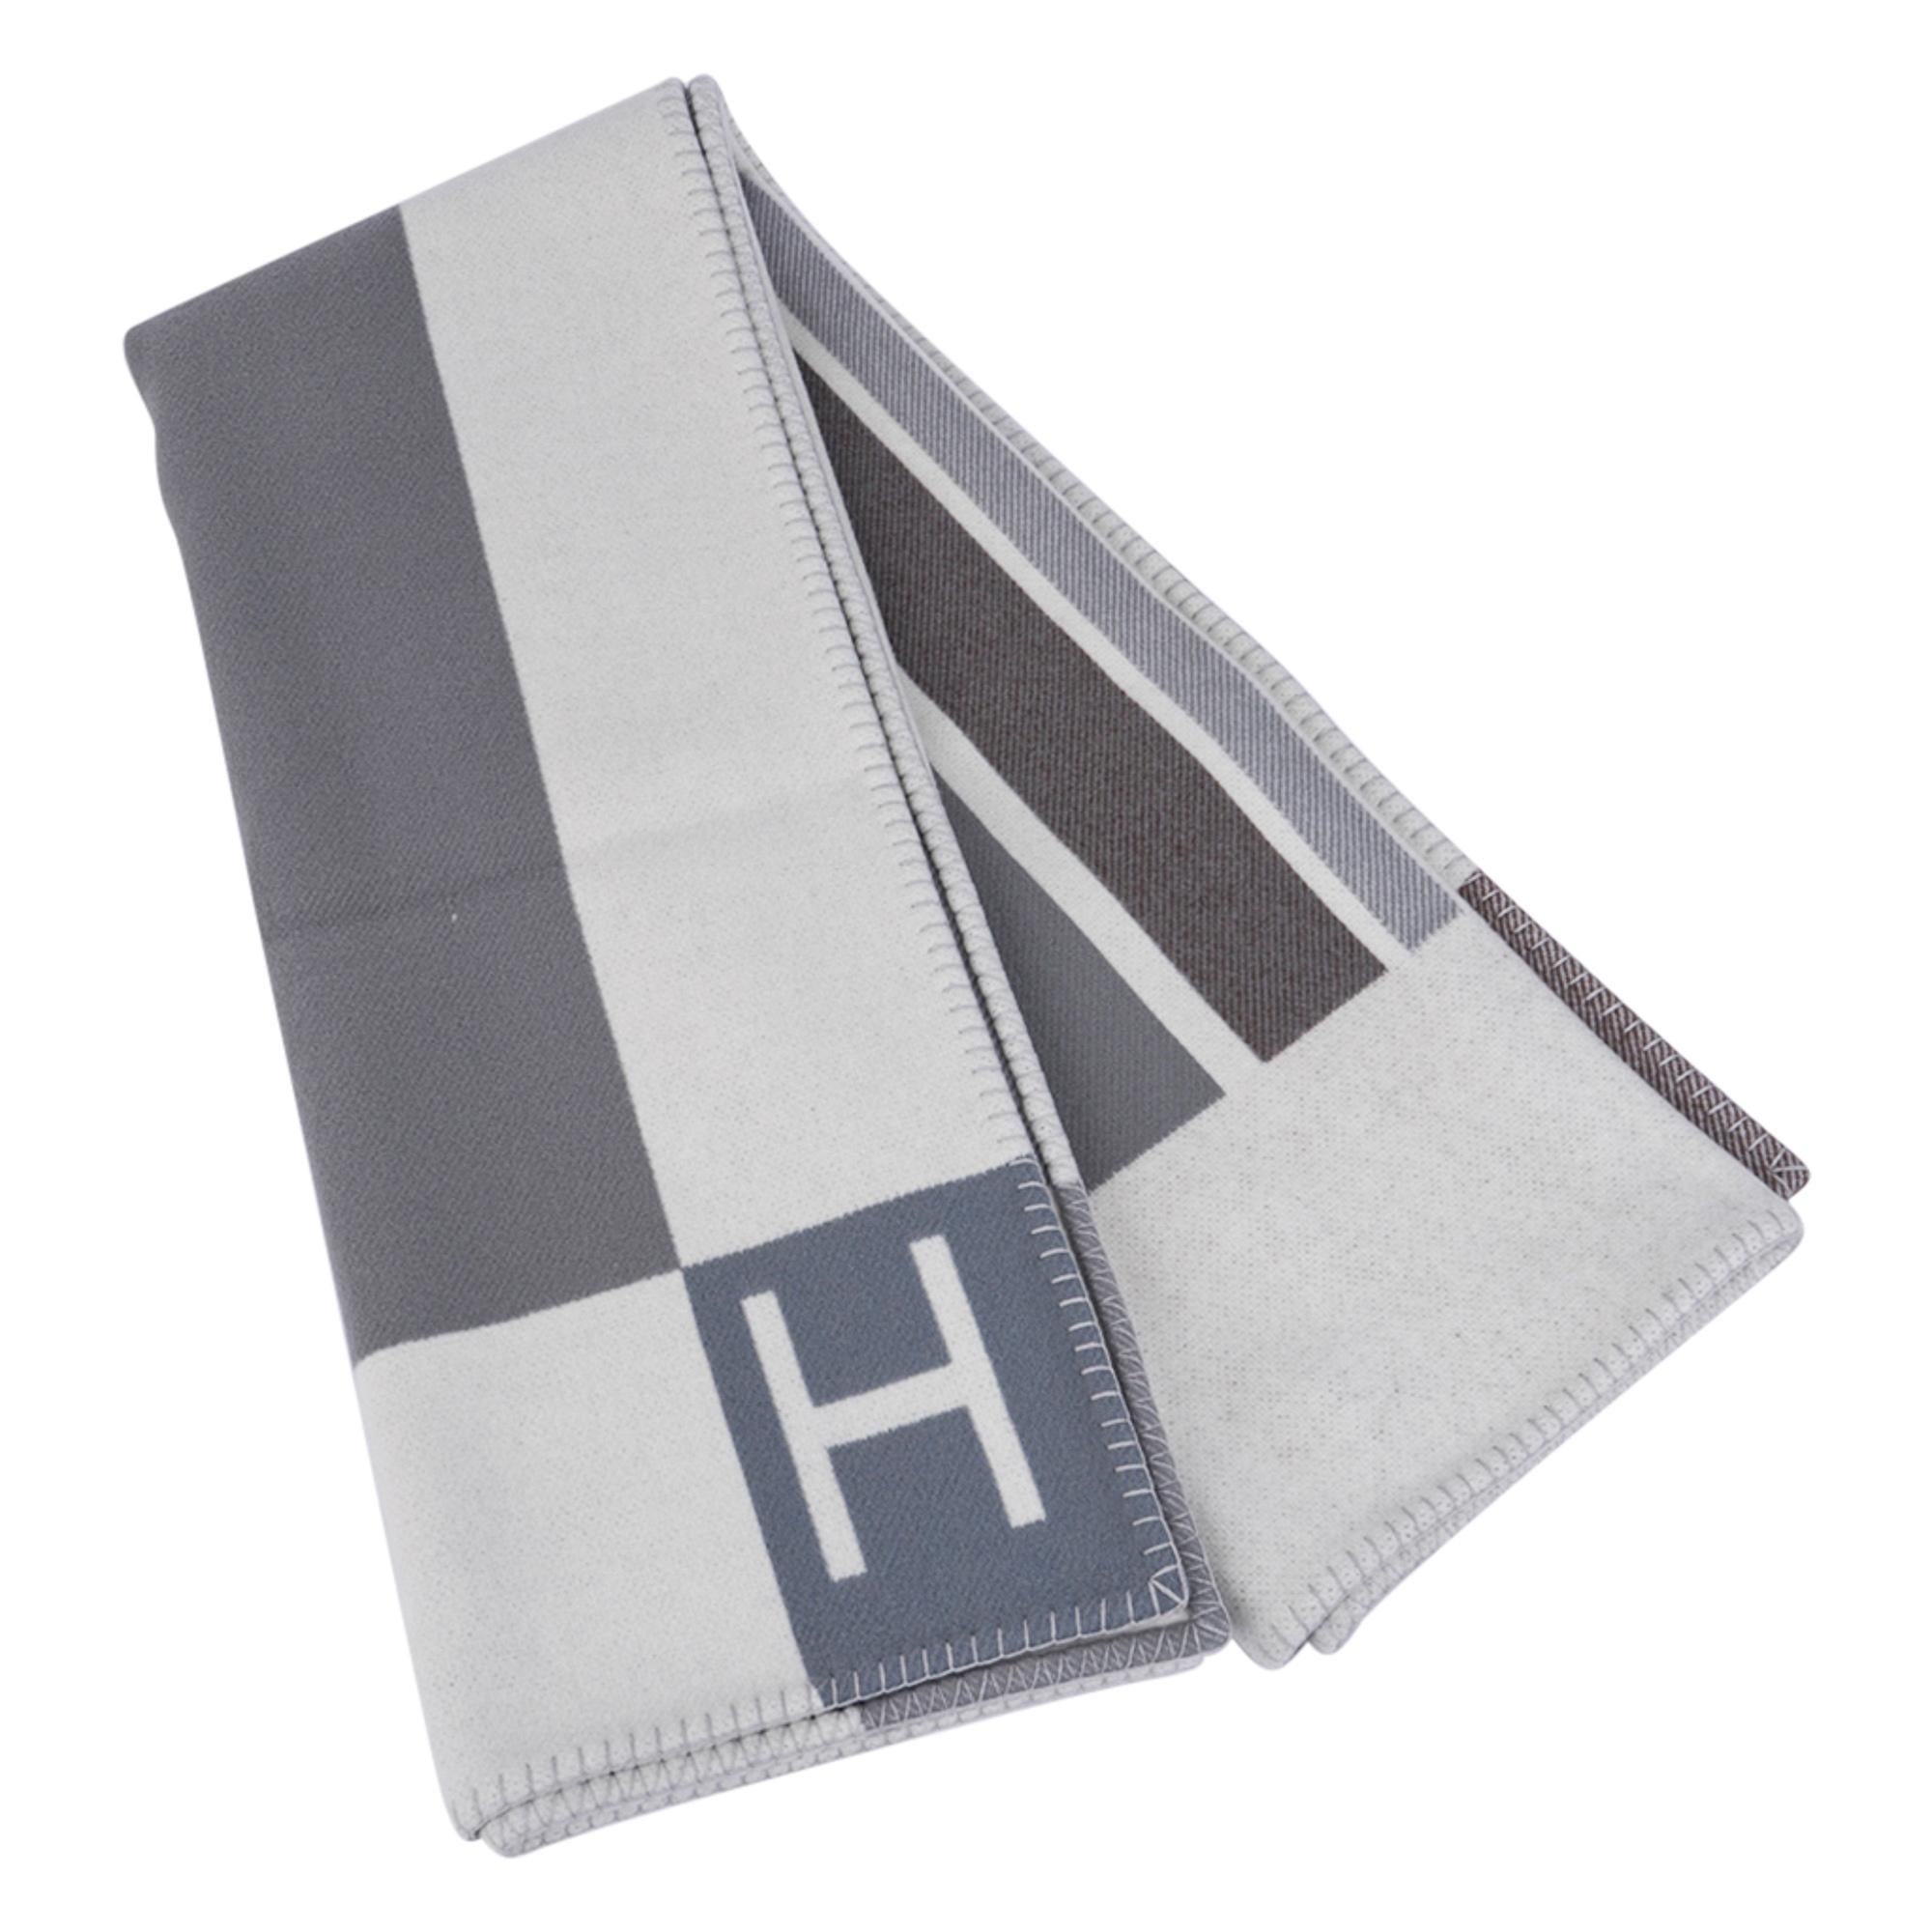 Guaranteed authentic Hermes Avalon Vibration Blanket featured in Gris / Ecru colorway.
Created from 90% Wool and 10% Cashmere this wonderfully warm blanket is a chic addition to any room.
Exquisite fresh modern creation!
New or Pristine Store Fresh